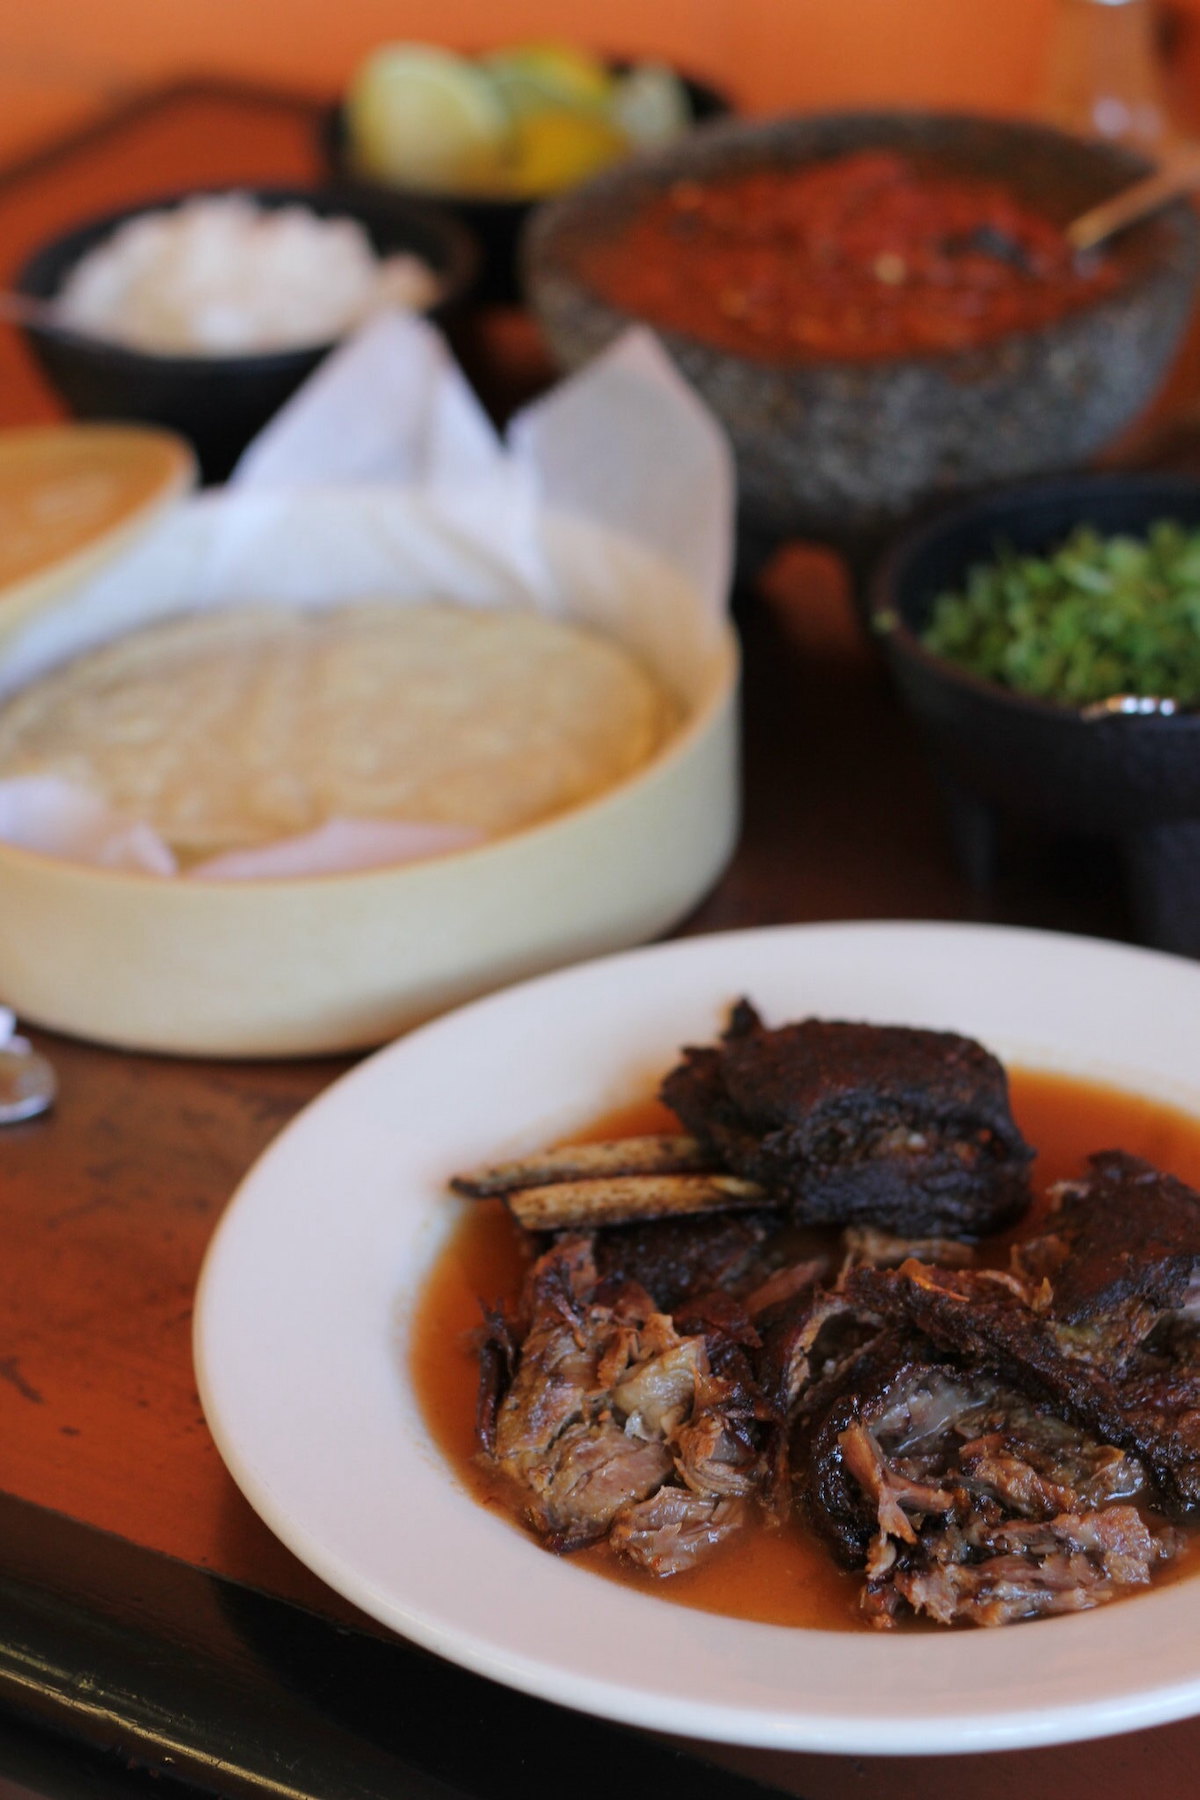 Close up of a table at Birrieria Zaragoza in Chicago. Stewed goat meat is on a white plate in the foreground, wtih salsa, tortillas, and toppings in the background